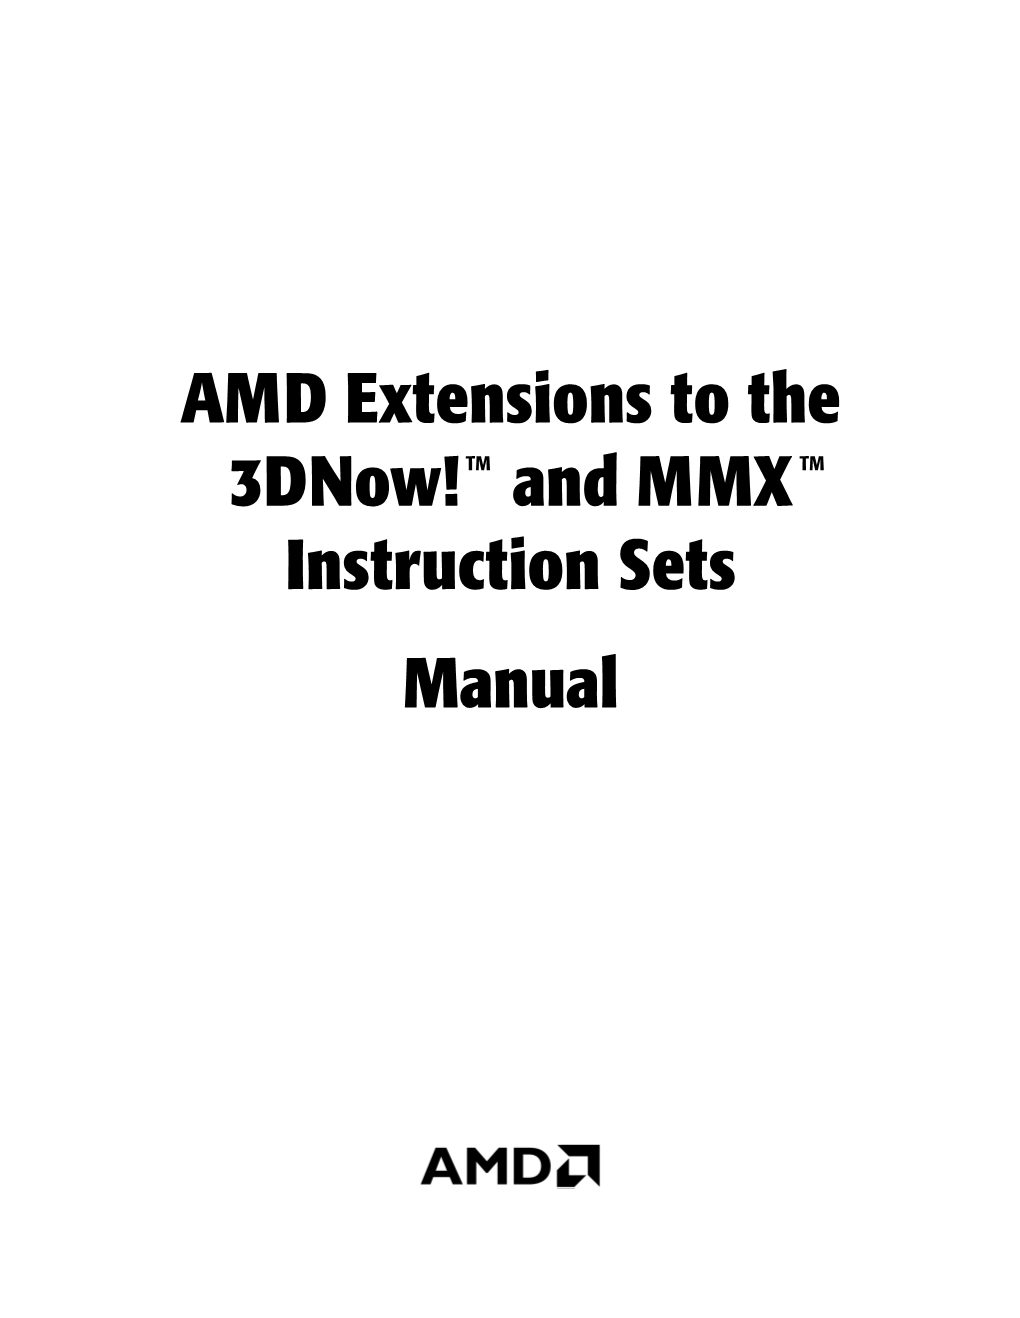 AMD Extensions to the 3Dnow! and MMX Instruction Sets Manual